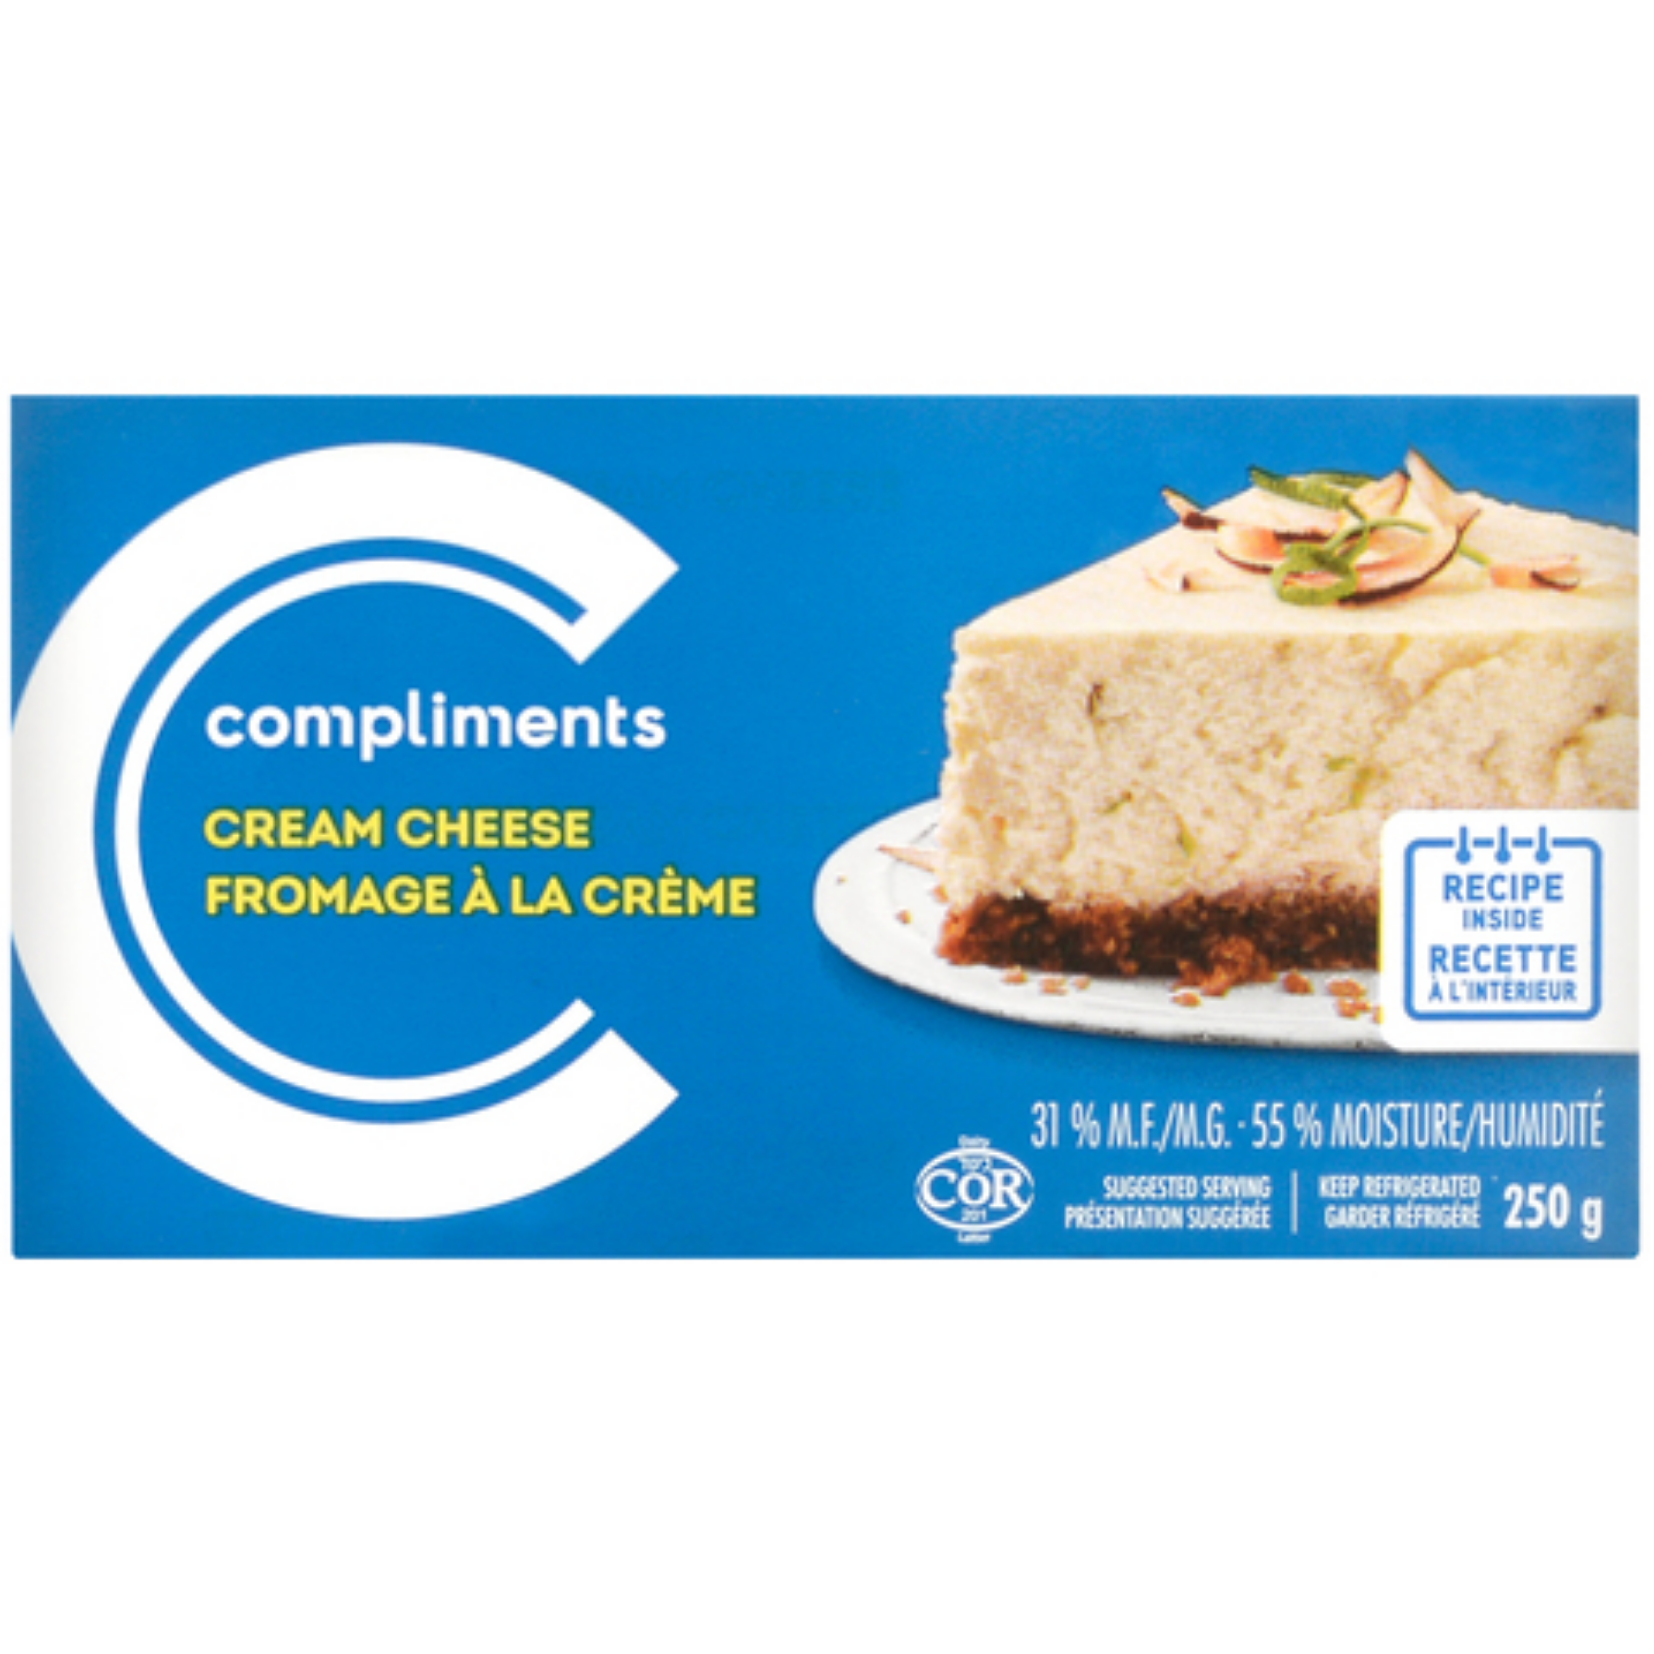 Compliments Cream Cheese 250g